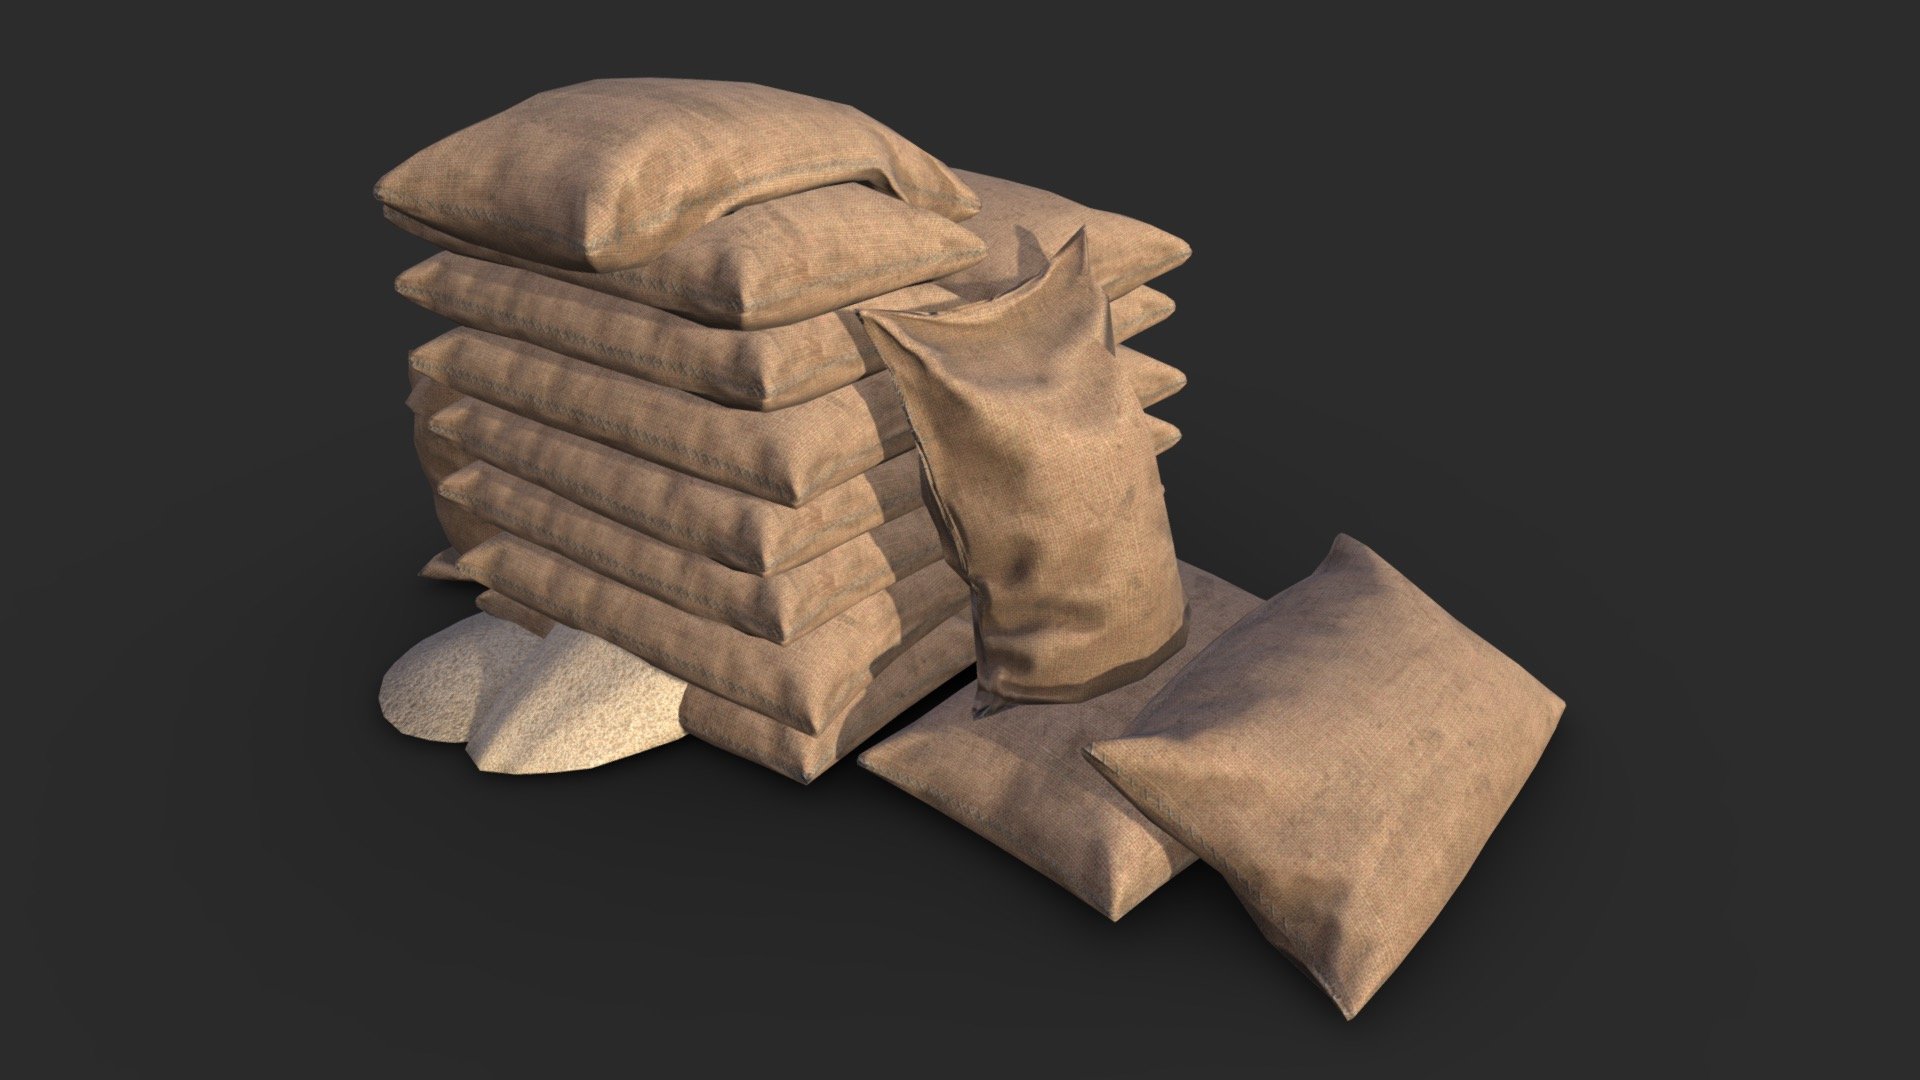 This vintage bulk bags assets pack including 10 individual bag sets and 2 content sets with 3 LODs and collision boxes. All elements can easily be positioned together to create a more detailed scene. Also, this pack includes 5 pre-assembled sets to allow you to speed up your assemblies.


All individual assets

This AAA game asset of old bulk bags will embellish you scene and add more details which can help the gameplay and the game-design.

Low-poly model &amp; Blender native 2.90

SPECIFICATIONS




Objects : 12

Polygons : 2817

Subdivision ready : No

Render engine : Eevee (Cycles ready)

GAME SPECS




LODs : Yes (inside FBX for Unity &amp; Unreal)

Numbers of LODs : 3

Collider : Yes

Lightmap UV : No

EXPORTED FORMATS




FBX

Collada

OBJ

TEXTURES




Materials in scene : 1

Textures sizes : 4K

Textures types : Base Color, Metallic, Roughness, Normal (DirectX &amp; OpenGL), Heigh &amp; AO (also Unity &amp; Unreal workflow maps)

Textures format : PNG
 - Generic Old Bags Assets - Buy Royalty Free 3D model by KangaroOz 3D (@KangaroOz-3D) 3d model